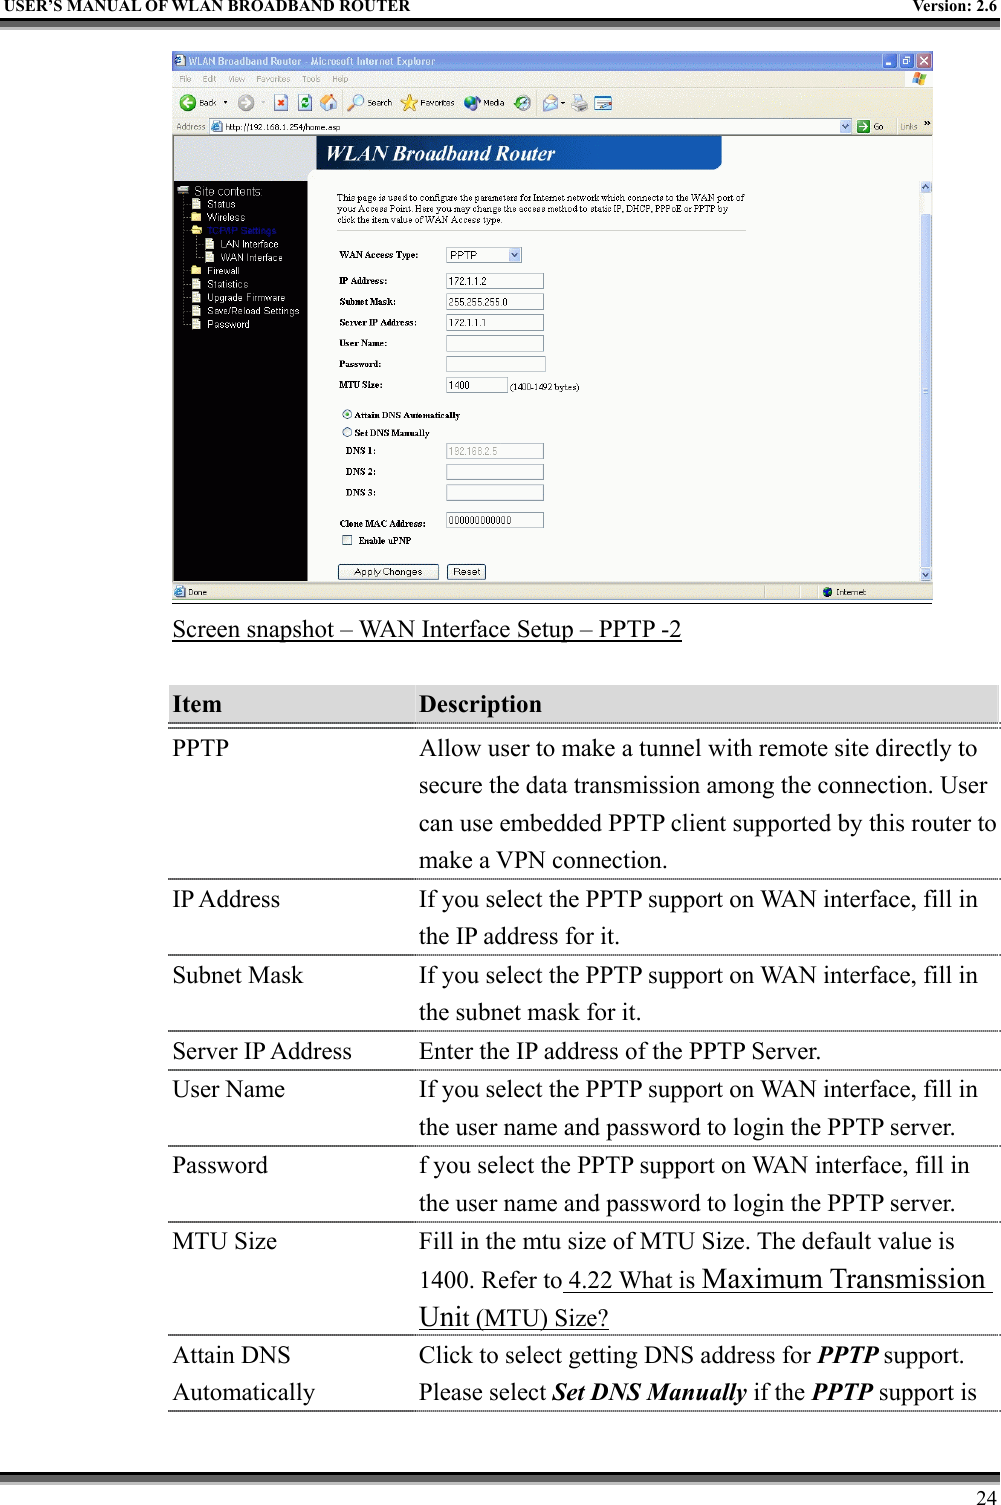   USER’S MANUAL OF WLAN BROADBAND ROUTER    Version: 2.6     24  Screen snapshot – WAN Interface Setup – PPTP -2  Item  Description   PPTP  Allow user to make a tunnel with remote site directly to secure the data transmission among the connection. User can use embedded PPTP client supported by this router to make a VPN connection. IP Address  If you select the PPTP support on WAN interface, fill in the IP address for it. Subnet Mask  If you select the PPTP support on WAN interface, fill in the subnet mask for it. Server IP Address  Enter the IP address of the PPTP Server. User Name  If you select the PPTP support on WAN interface, fill in the user name and password to login the PPTP server. Password  f you select the PPTP support on WAN interface, fill in the user name and password to login the PPTP server. MTU Size  Fill in the mtu size of MTU Size. The default value is 1400. Refer to 4.22 What is Maximum Transmission Unit (MTU) Size? Attain DNS Automatically Click to select getting DNS address for PPTP support. Please select Set DNS Manually if the PPTP support is 